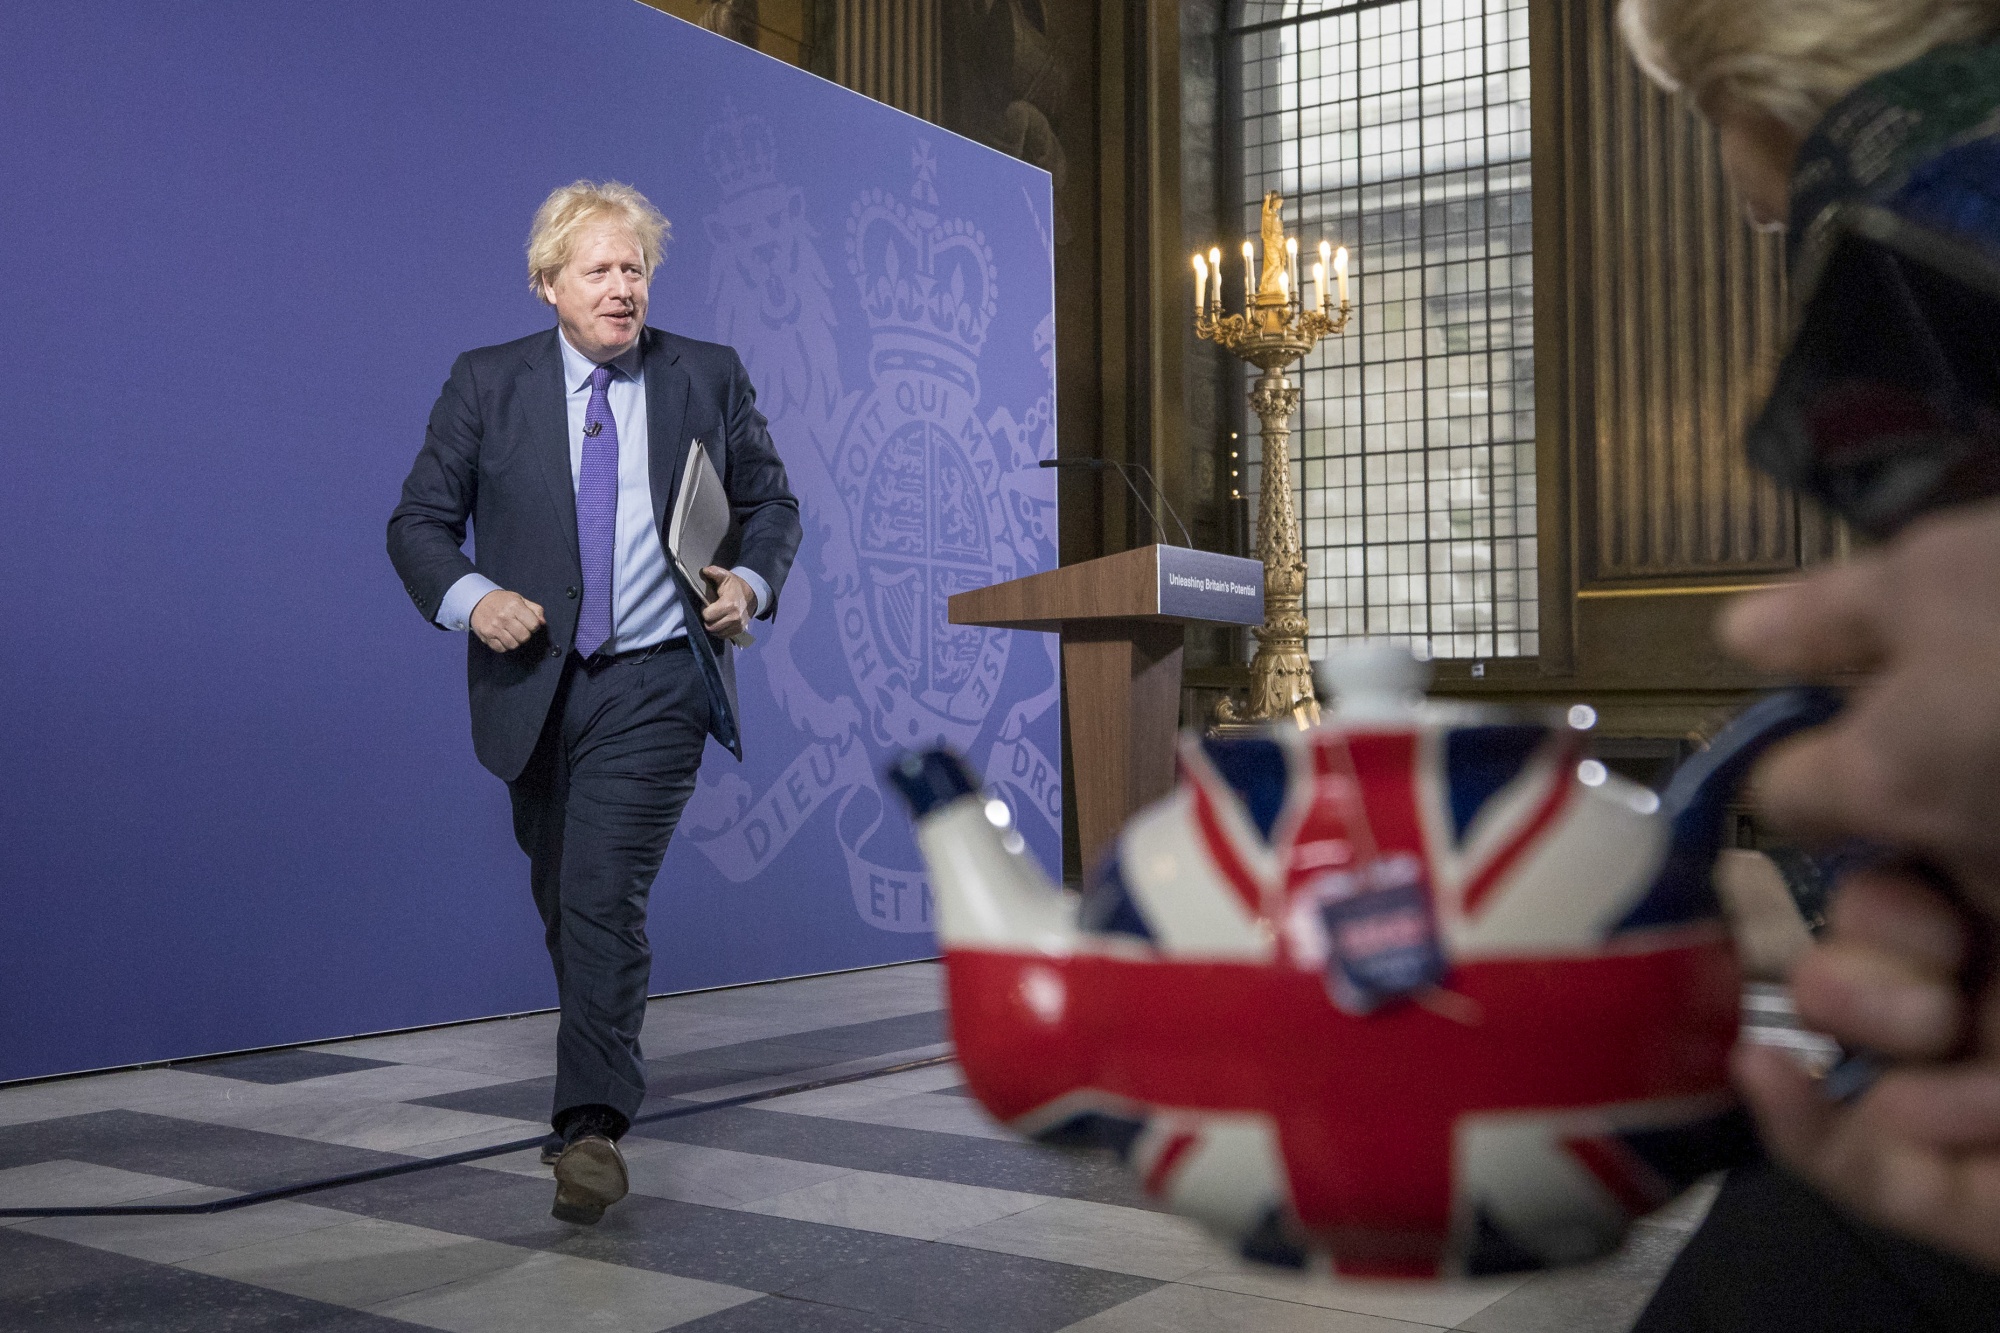 Boris Johnson departs following a speech on &quot;Unleashing Britain's Potential&quot; at the Old Royal Naval College in London, on Feb. 3.